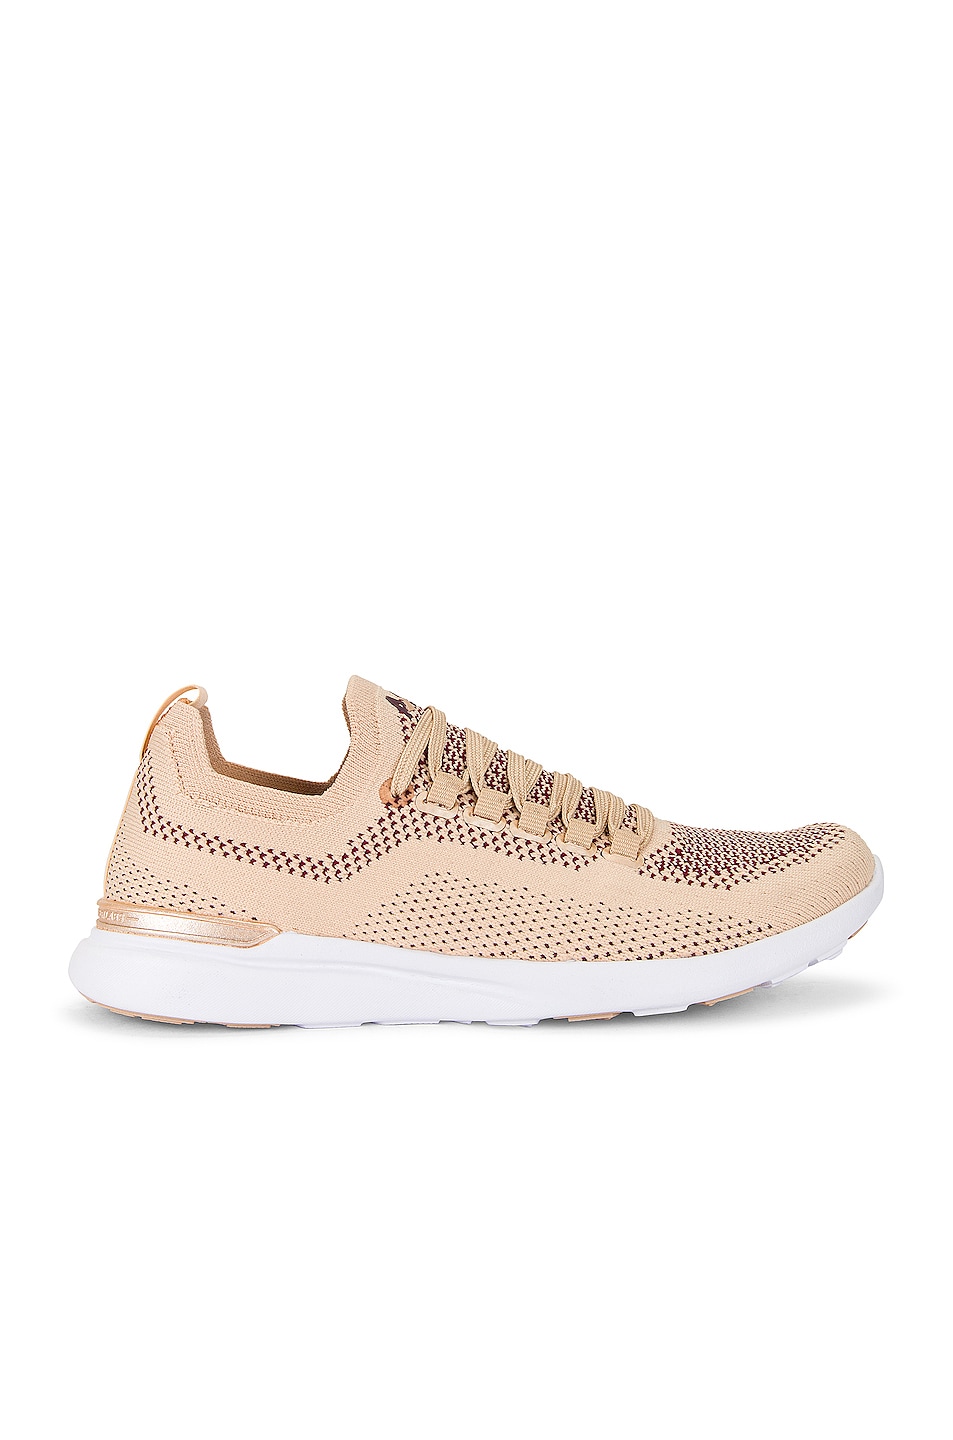 Image 1 of APL: Athletic Propulsion Labs Techloom Breeze Sneaker in Champagne, Burgundy, & White